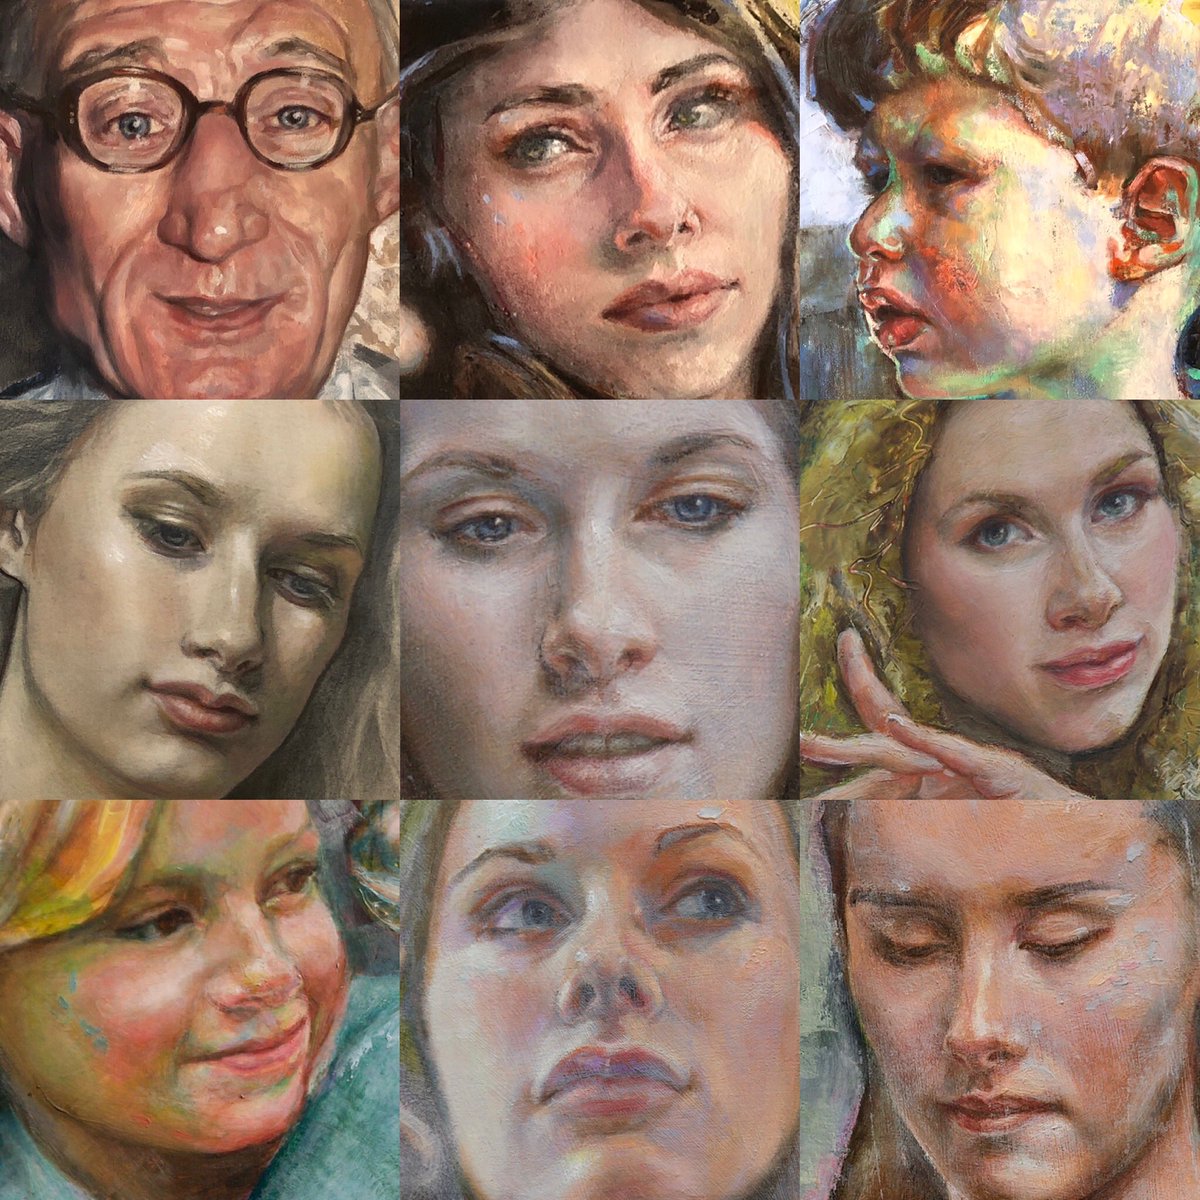 Wishing you happiness for 2022! Some faces from 2021, always interesting to look back & plan ahead! #NewYear #holidayseason #art #portraits  #yearinpictures #oilpainting #Cumbria